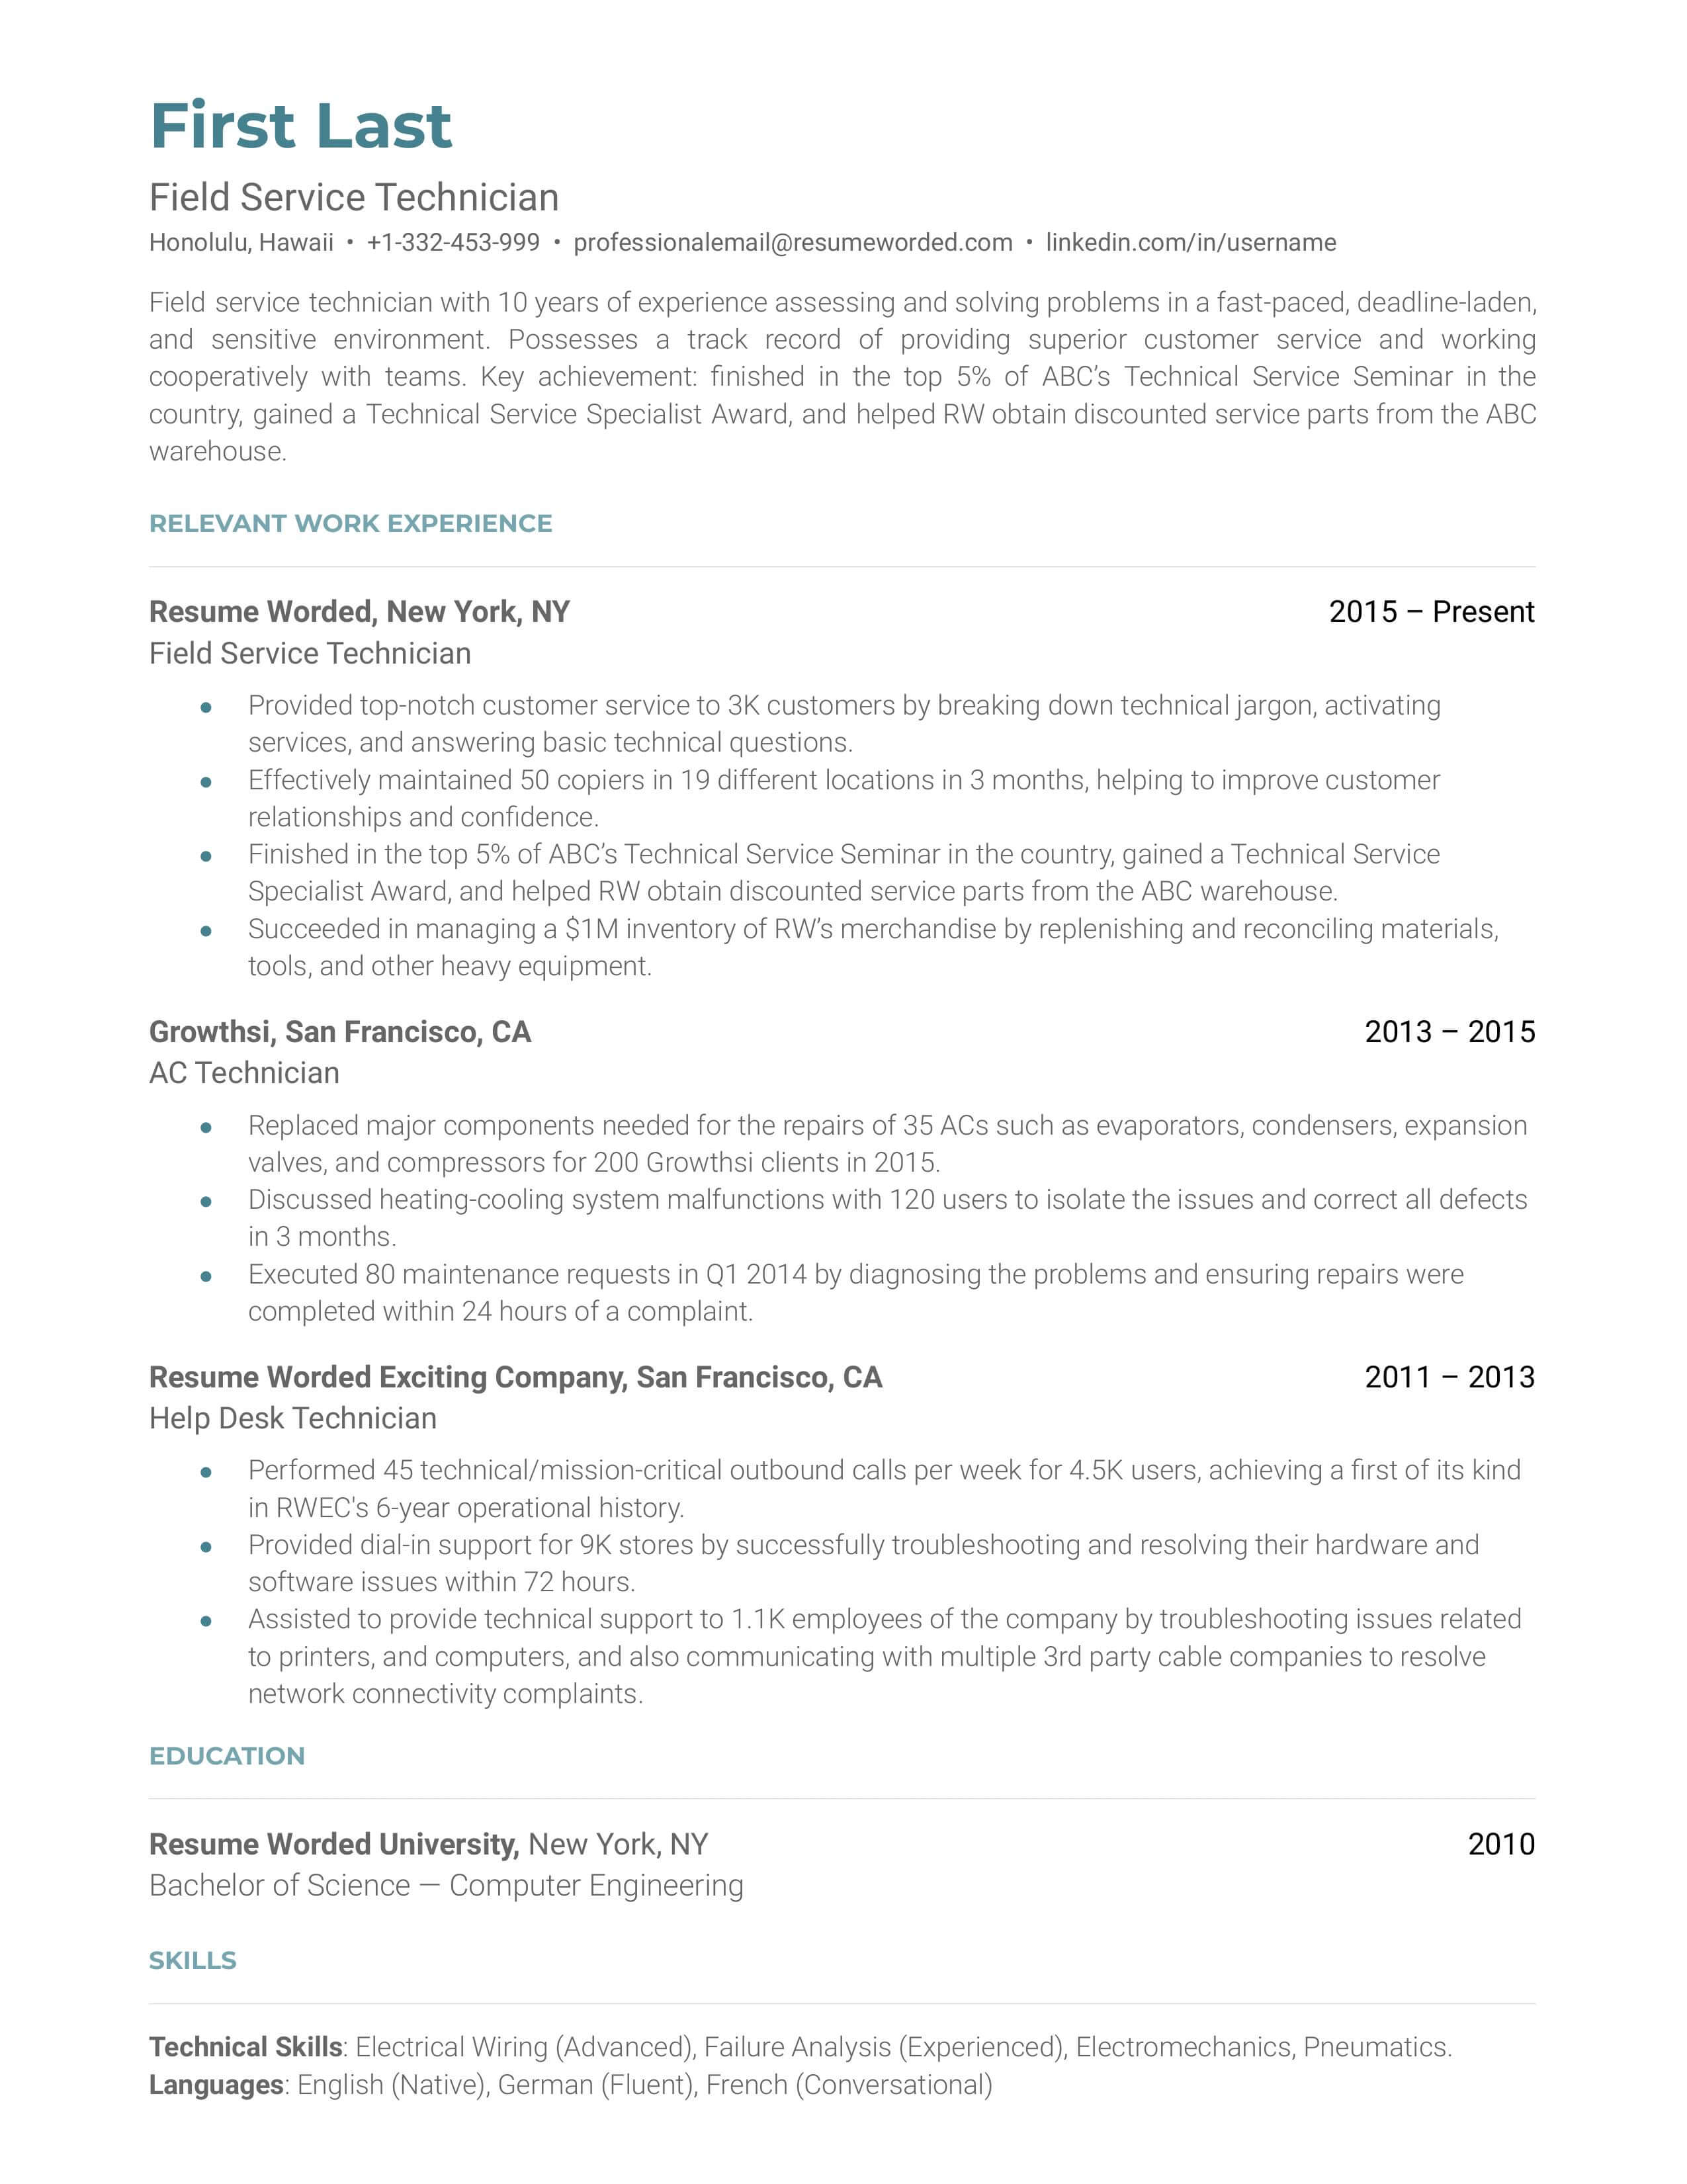 A Field Service Technician resume example highlighting robust educational background and professional experience.